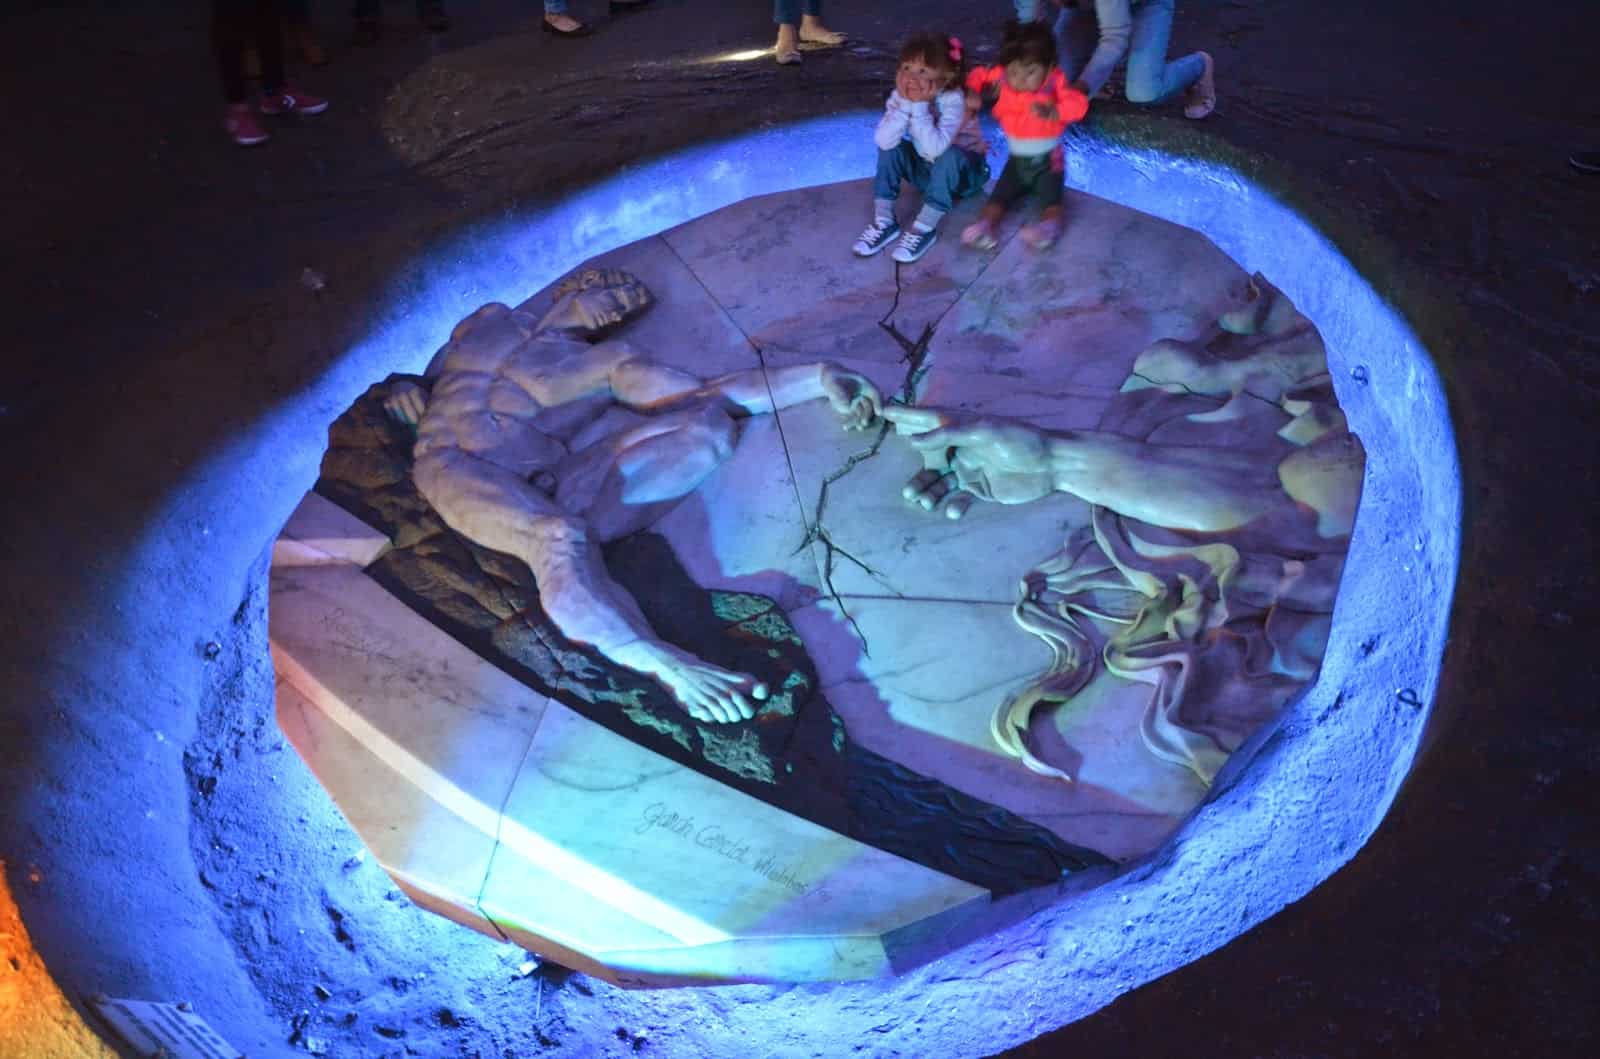 Michelangelo’s Creation of Adam carved into salt at the Salt Cathedral in Zipaquirá, Cundinamarca, Colombia